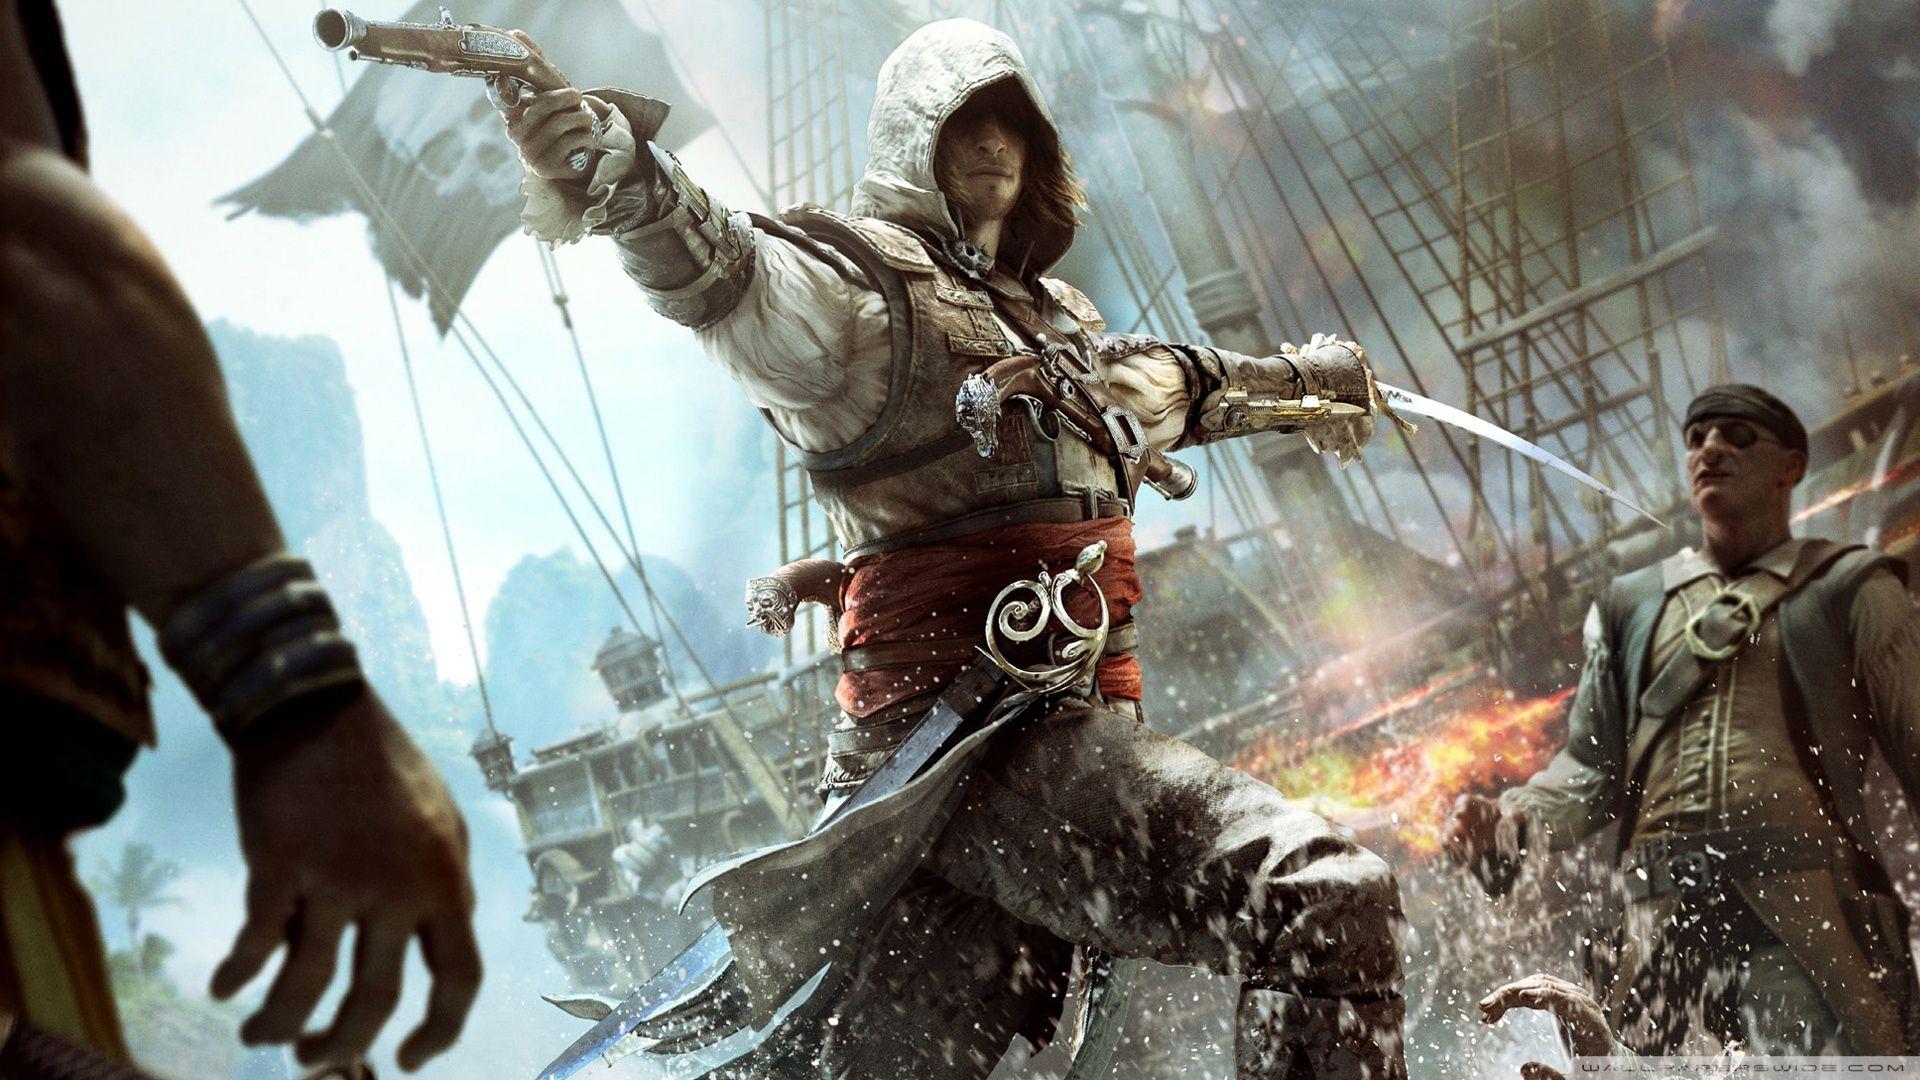 Edward Kenway End up with Mary Read